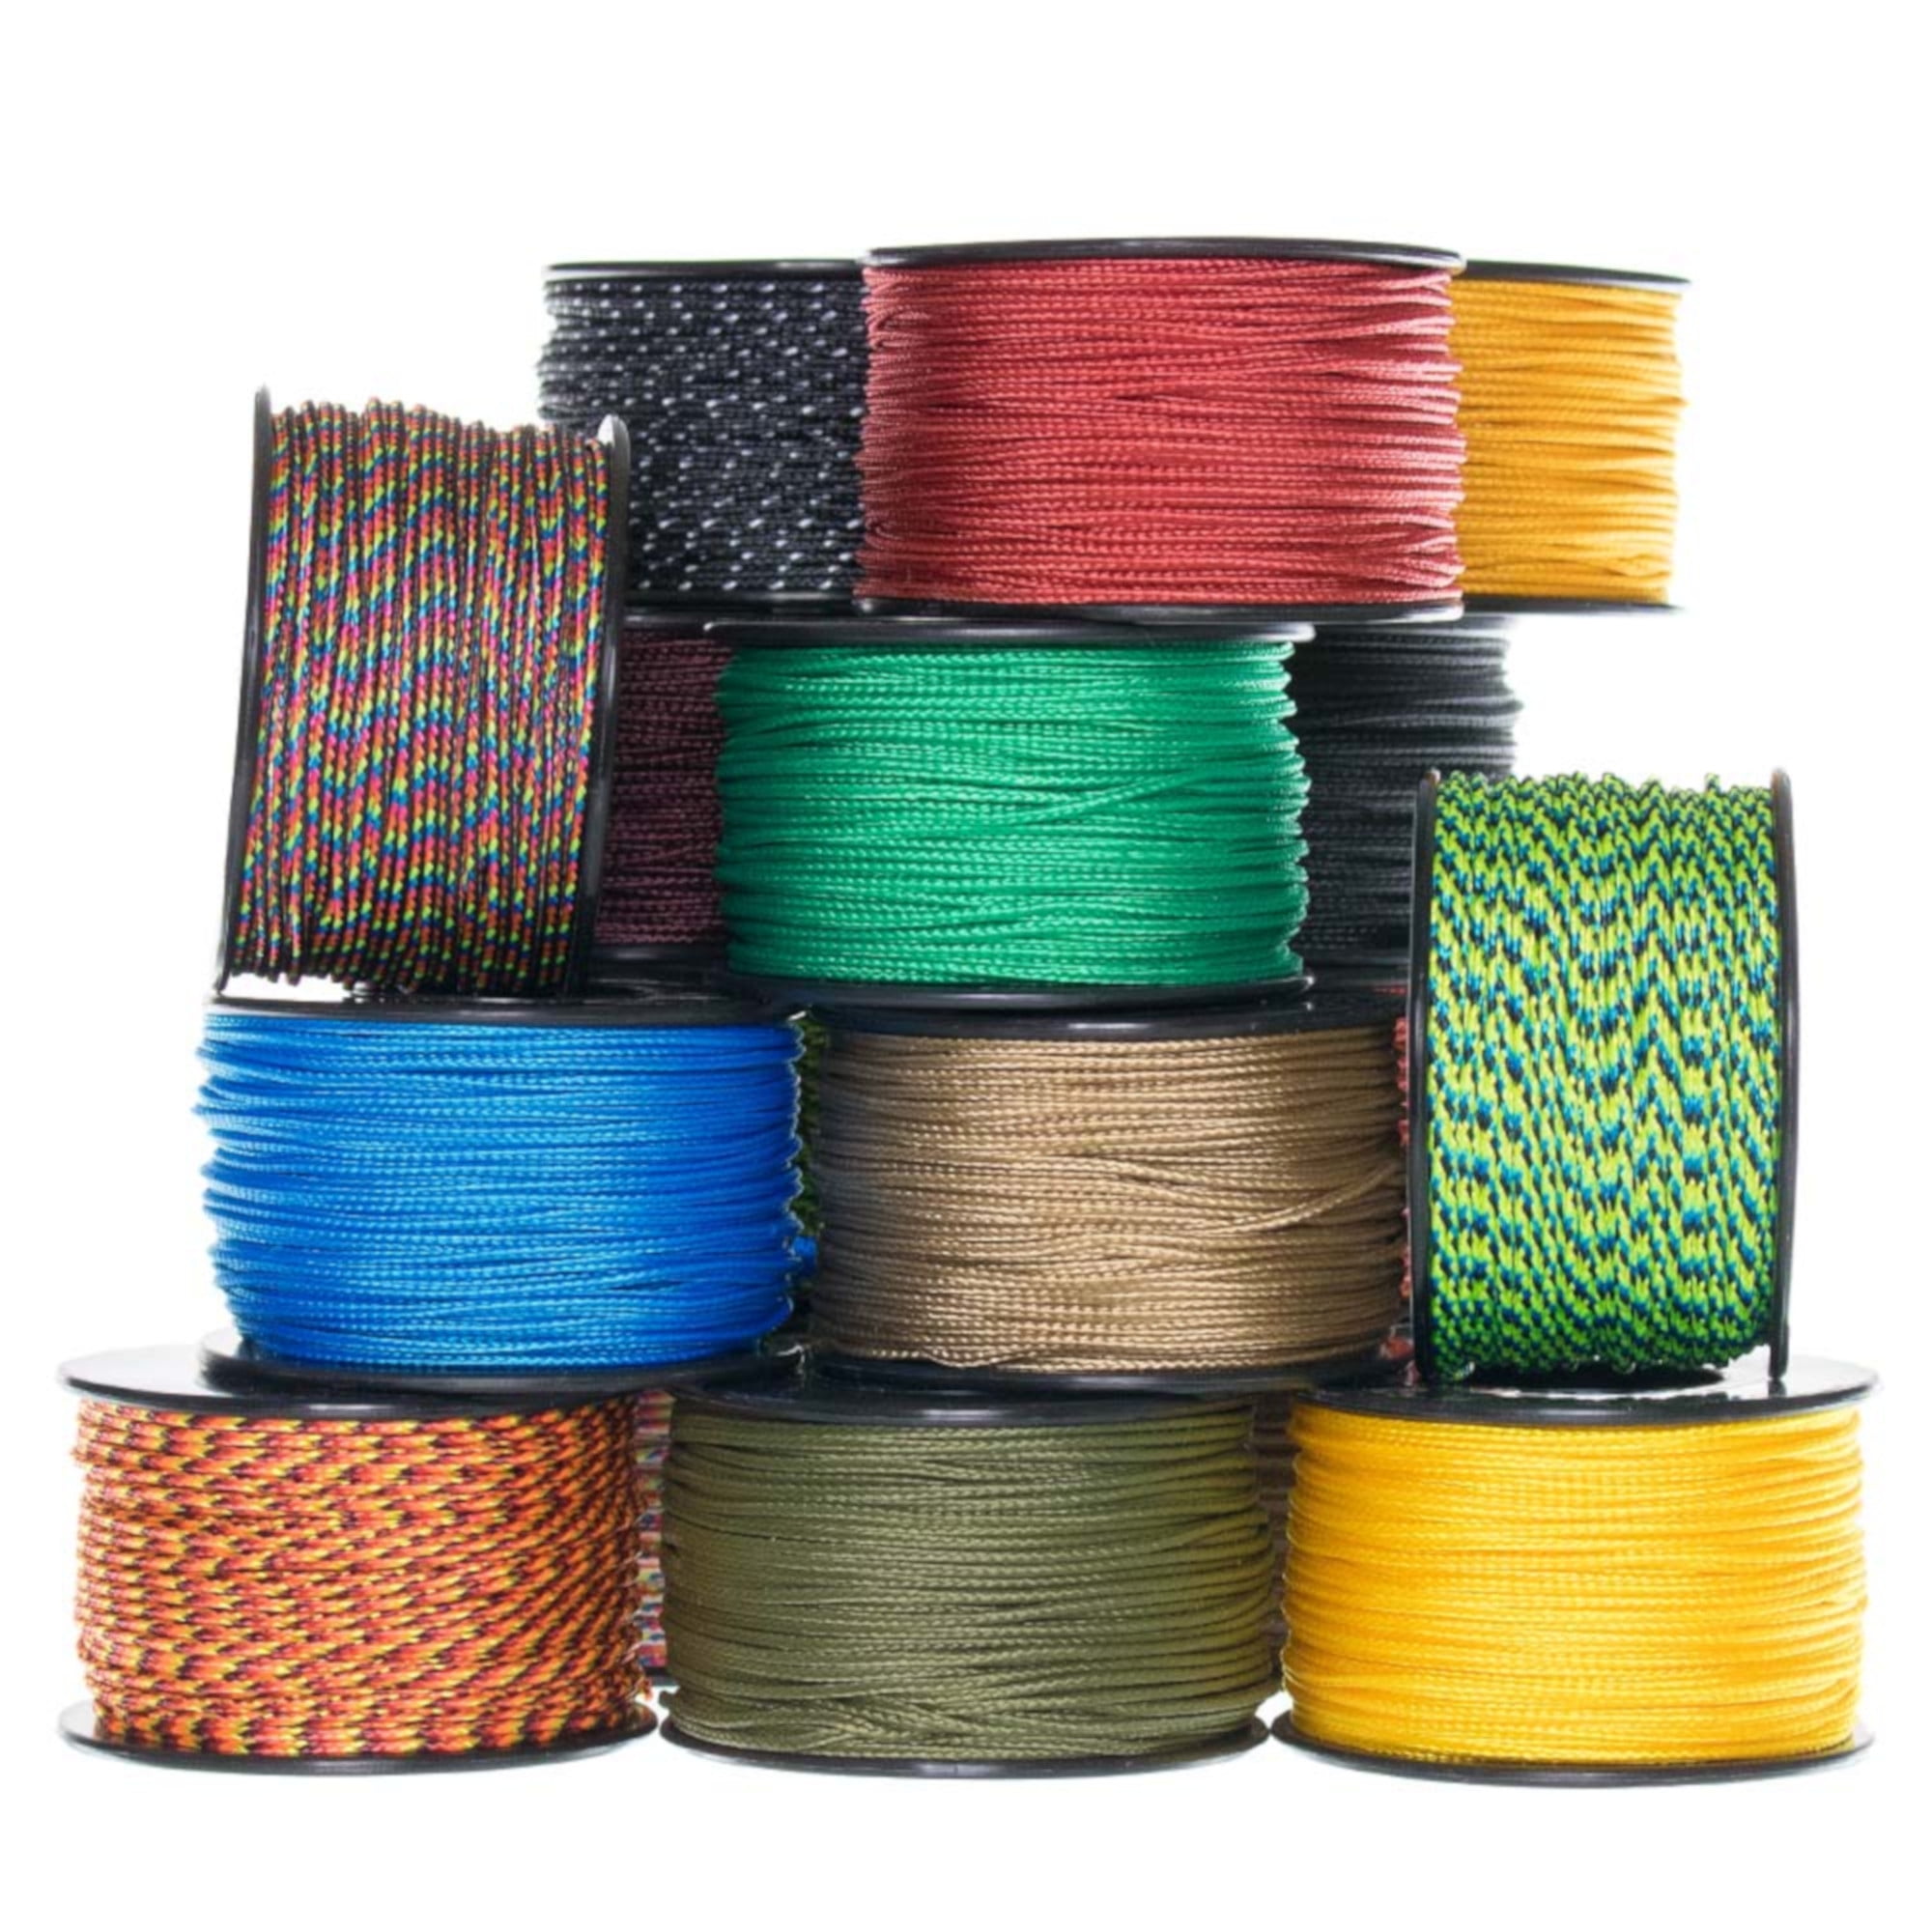 Packs Contain Varying Number of Micro Cord Spools Based on Selection PARACORD PLANET Micro Cord Multi Packs Tensile Strength Micro Cord for Crafting and Utility Purposes 100 lb